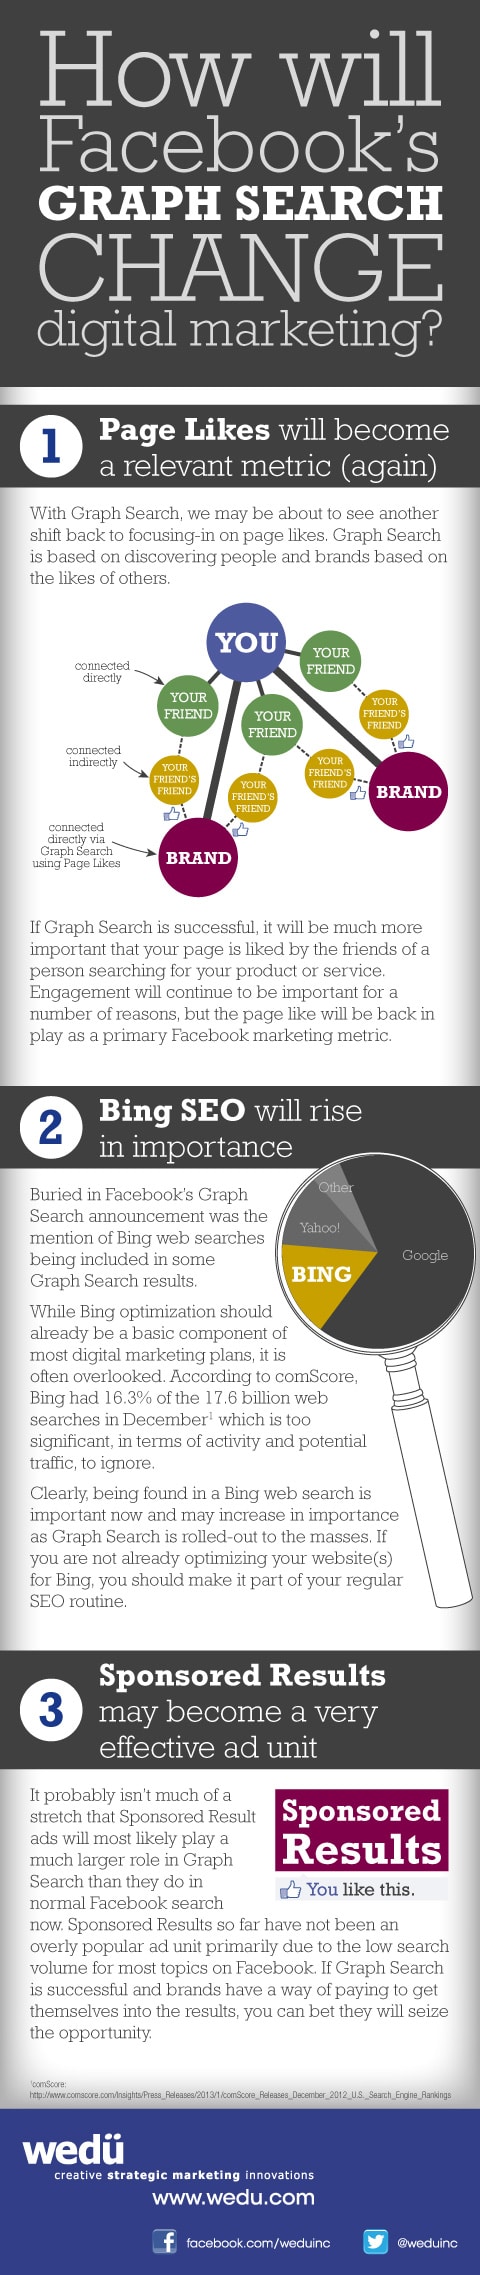 facebook-graph-search-benefits-infographic